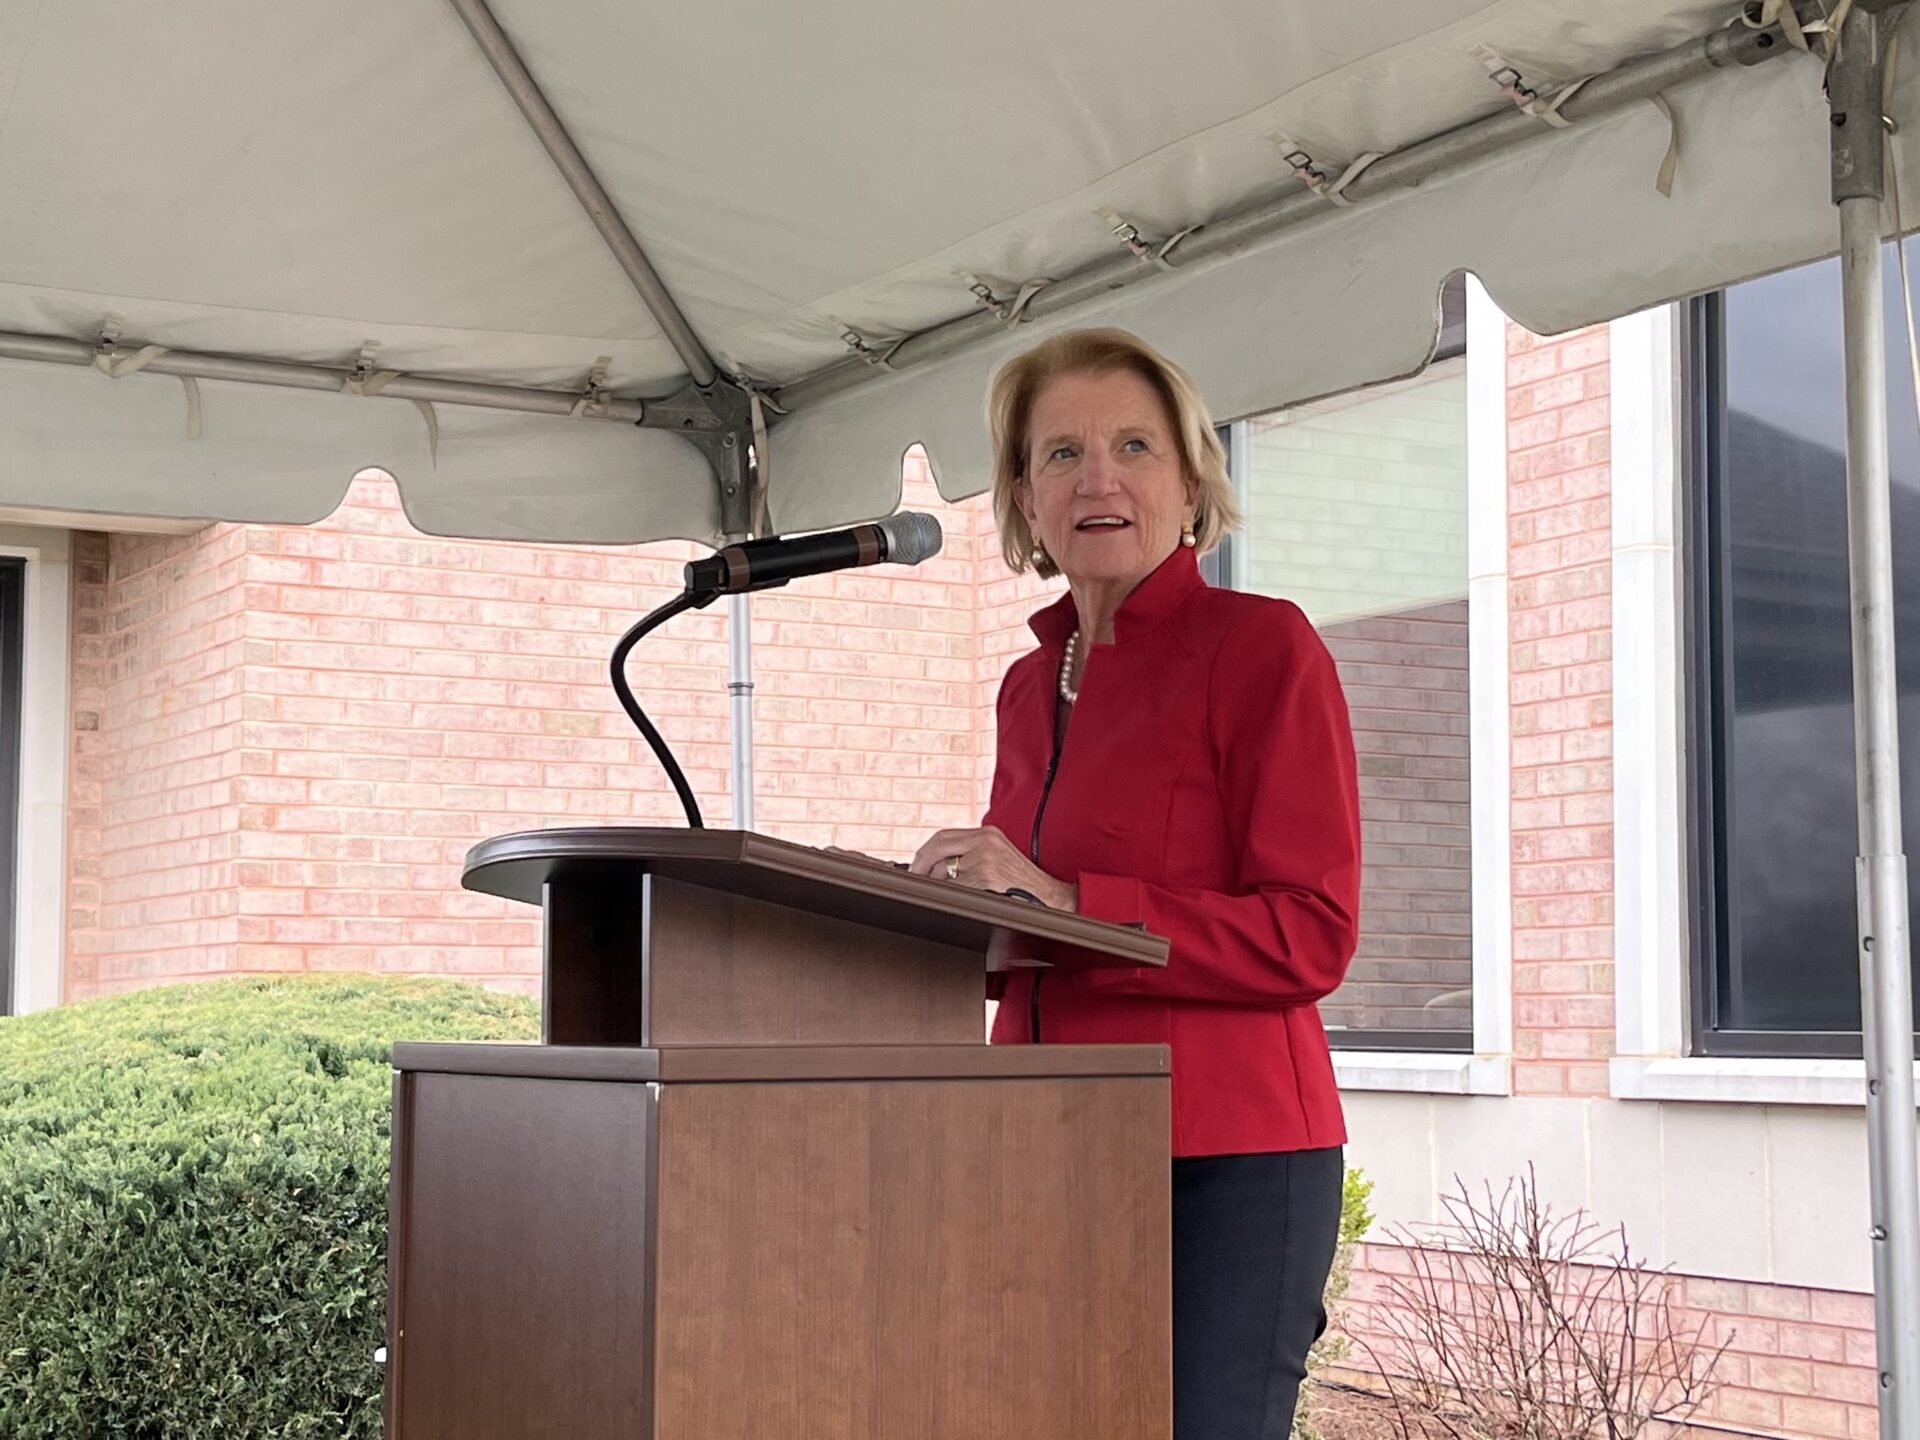 Senator Shelley Moore Capito stands at a podium, speaking into a microphone. She is wearing a blazer, and looking to her left, toward the camera.